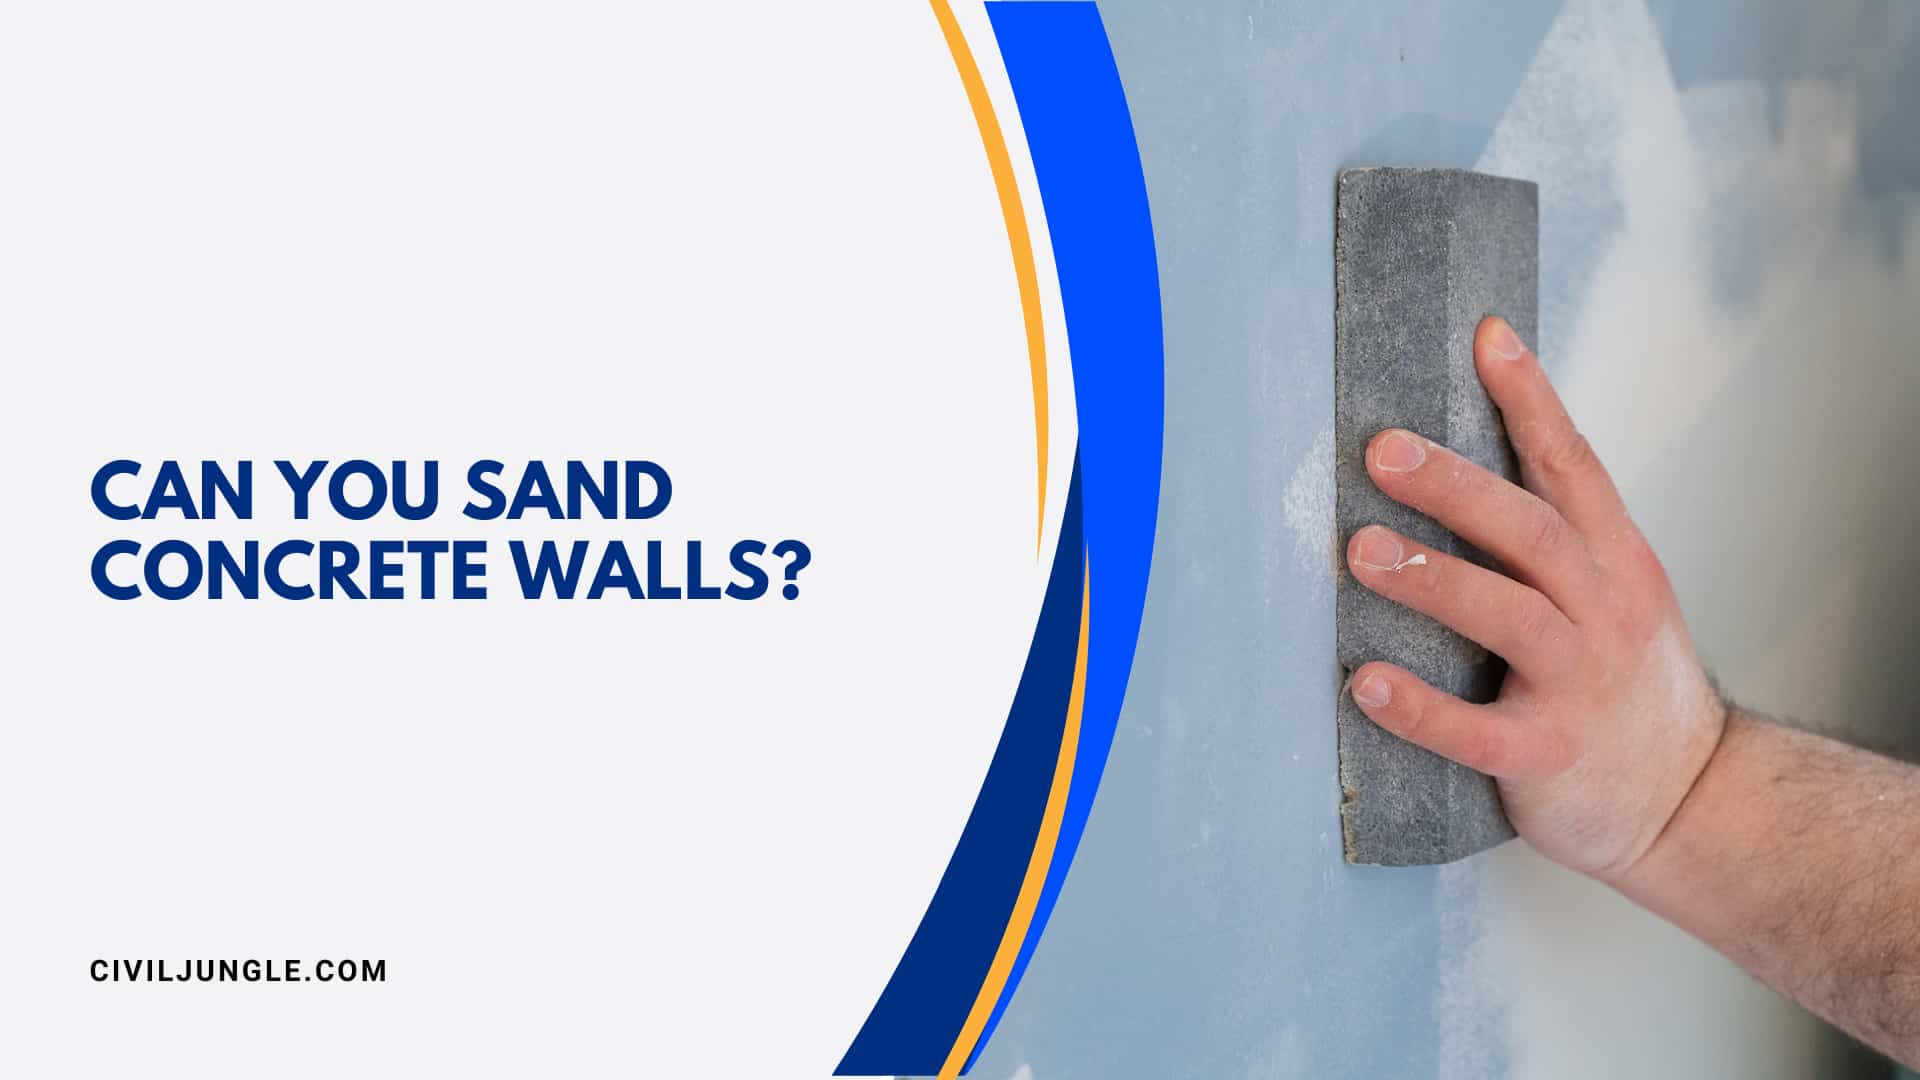 Can You Sand Concrete Walls?